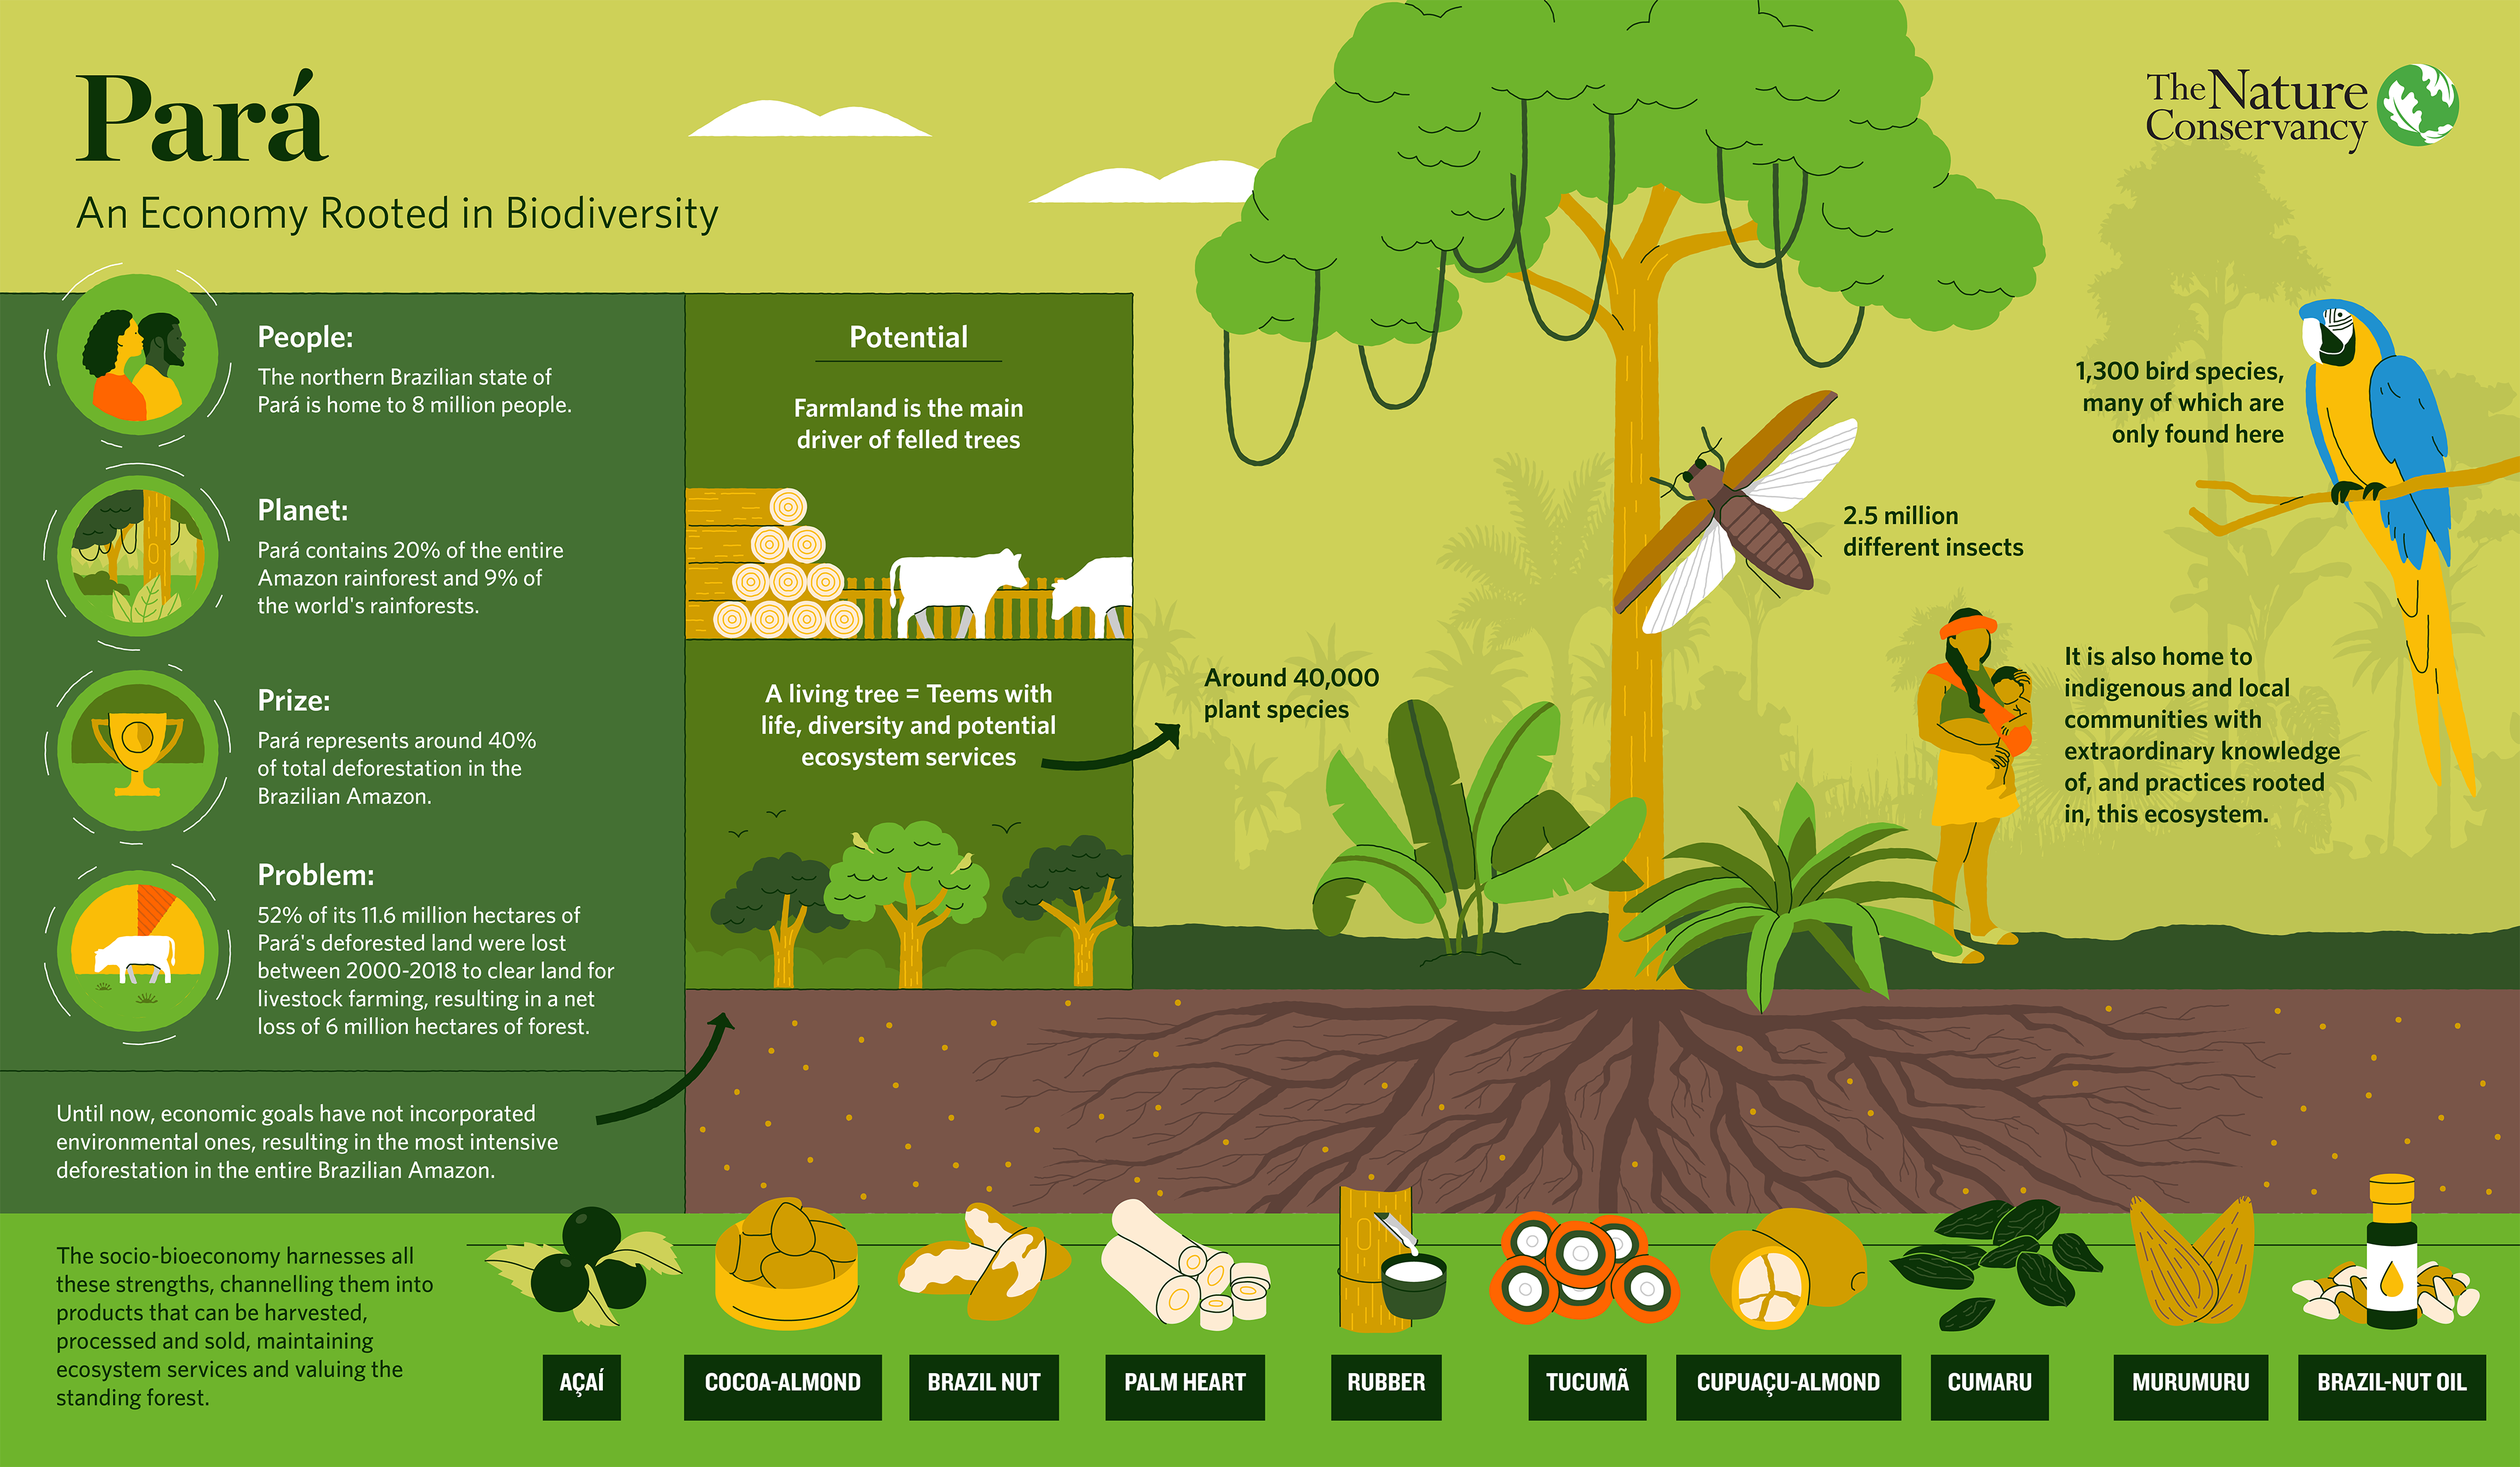 Thumbnail of infographic with green, yellow, and orange text and illustrations.